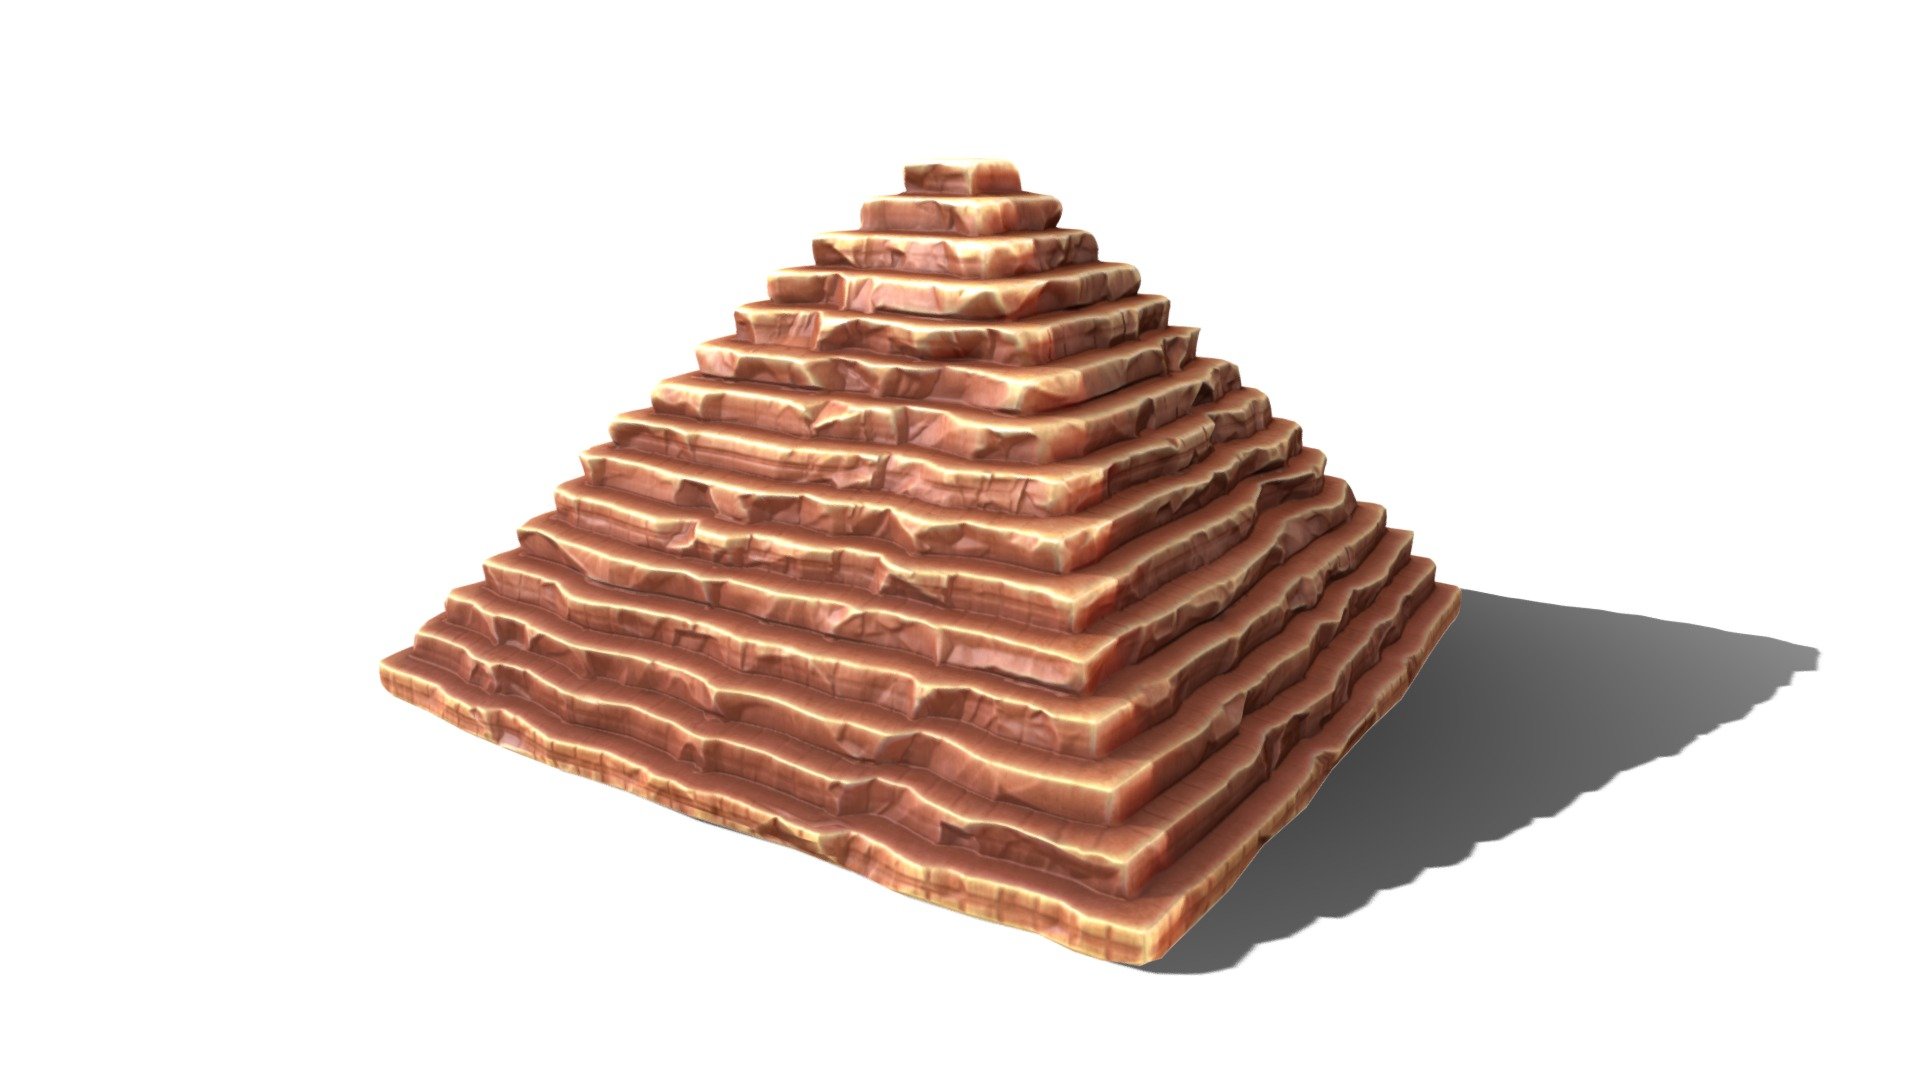 Originally modeled in Cinema 4D R 21 + Zbrush 2020



Maps for Cartoon Pyramid




BaseColor

Metallic

Roughness

Normal

Ambient Occlusion



SCALE:
- Model at world center and real scale:
       Metric in centimeter
       1 unit = 1 centimeter



Texture resolution 2048x2048
Texture format PNG



Poly Count :
Polygon Count - 9491
Vertex Count - 18978
No N-Gons - Cartoon Pyramid - Buy Royalty Free 3D model by zames1992 3d model